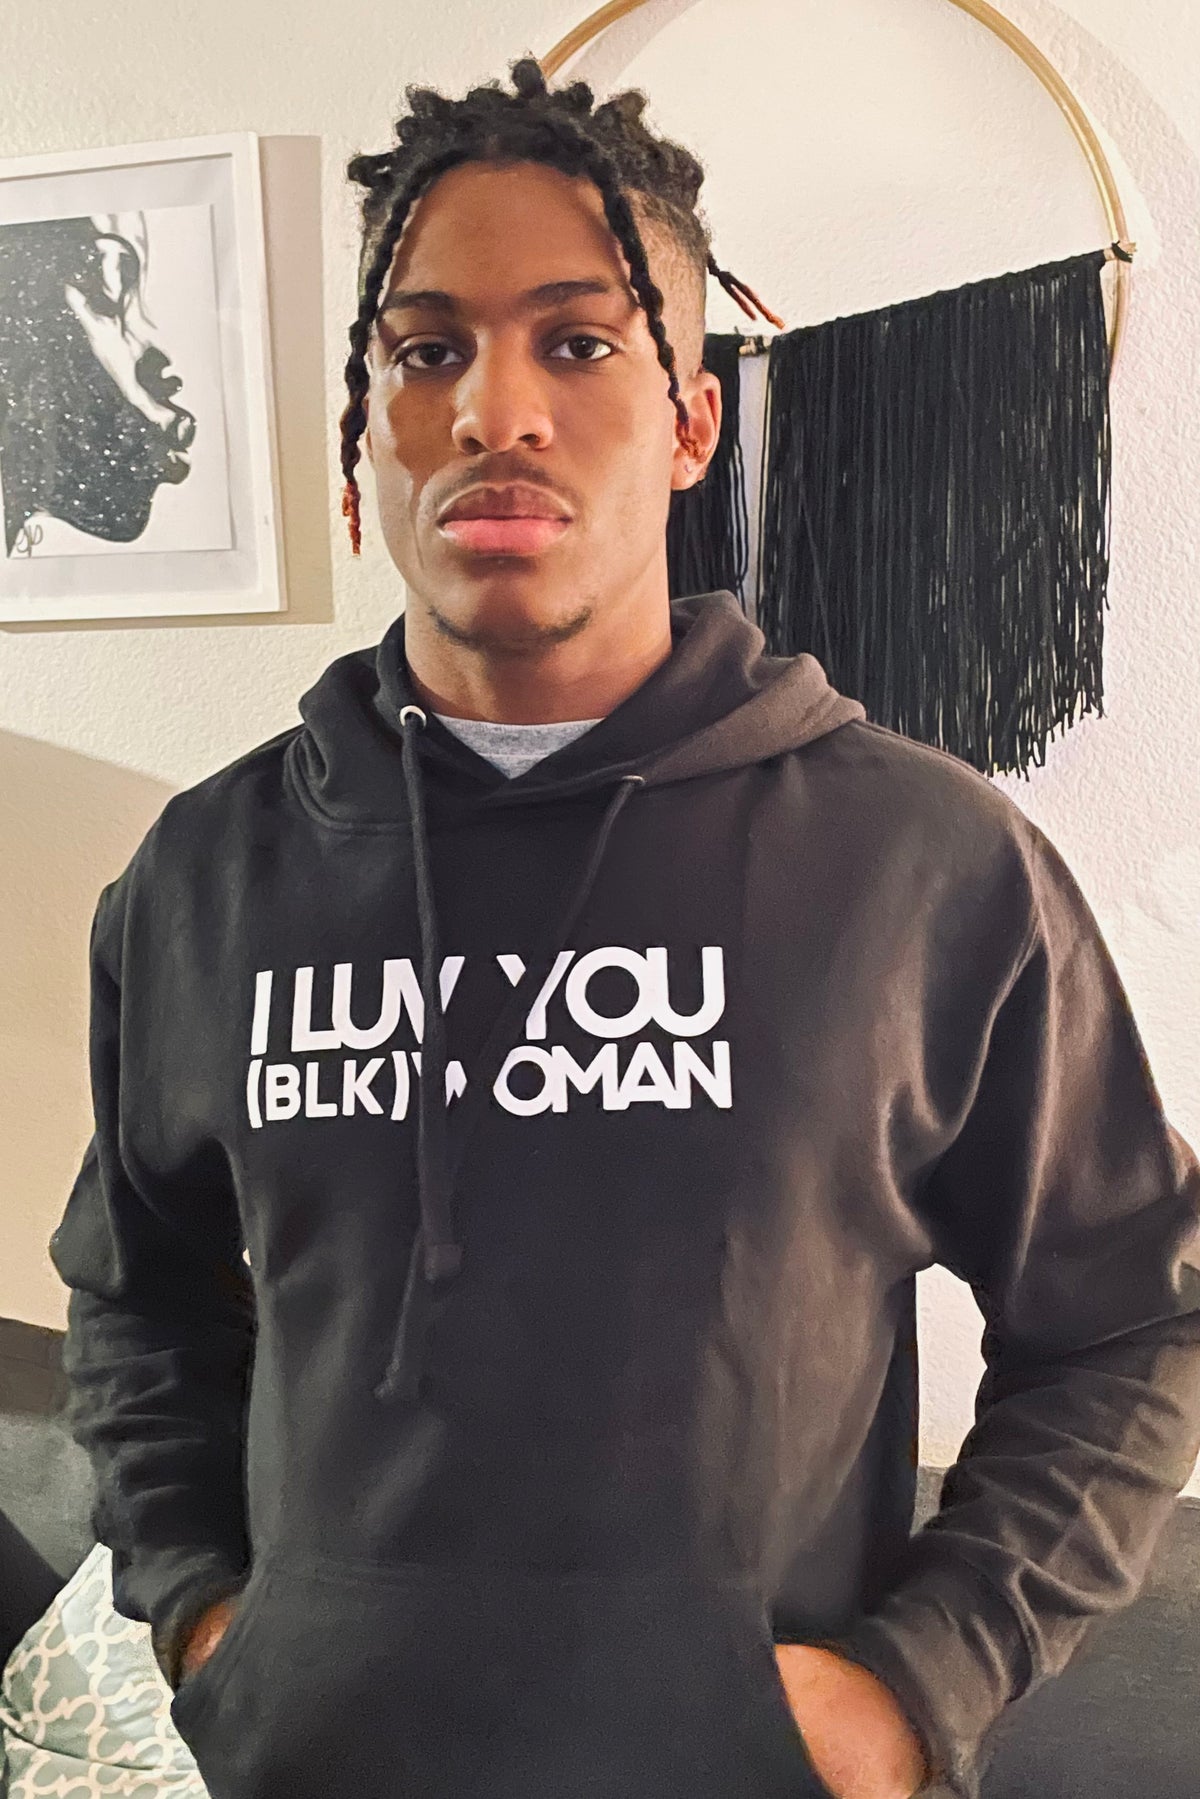 I LUV YOU (BLK) WOMAN Hoodie